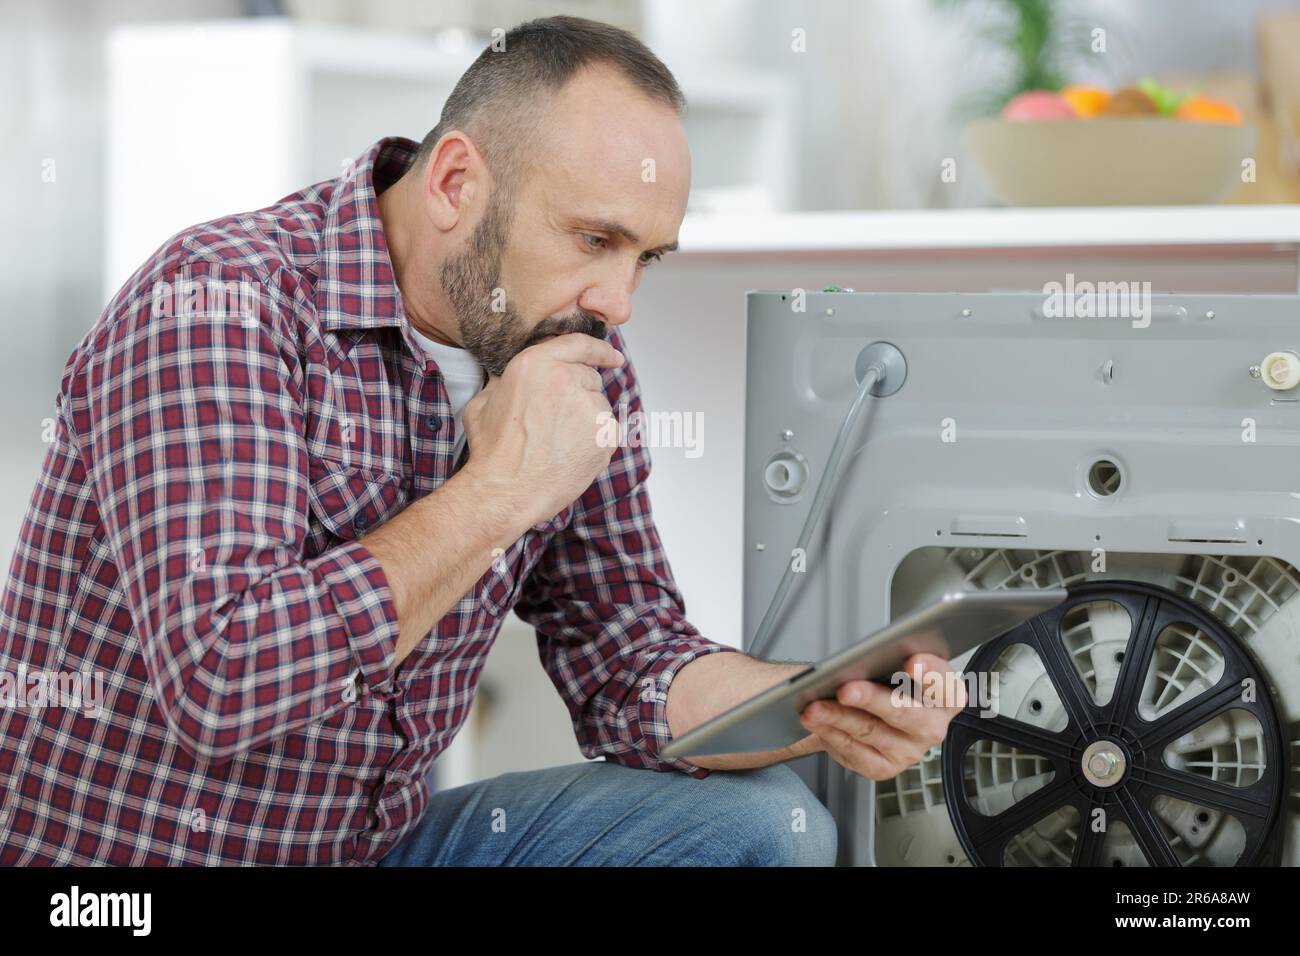 man using tablet to fix a washing machine Stock Photo